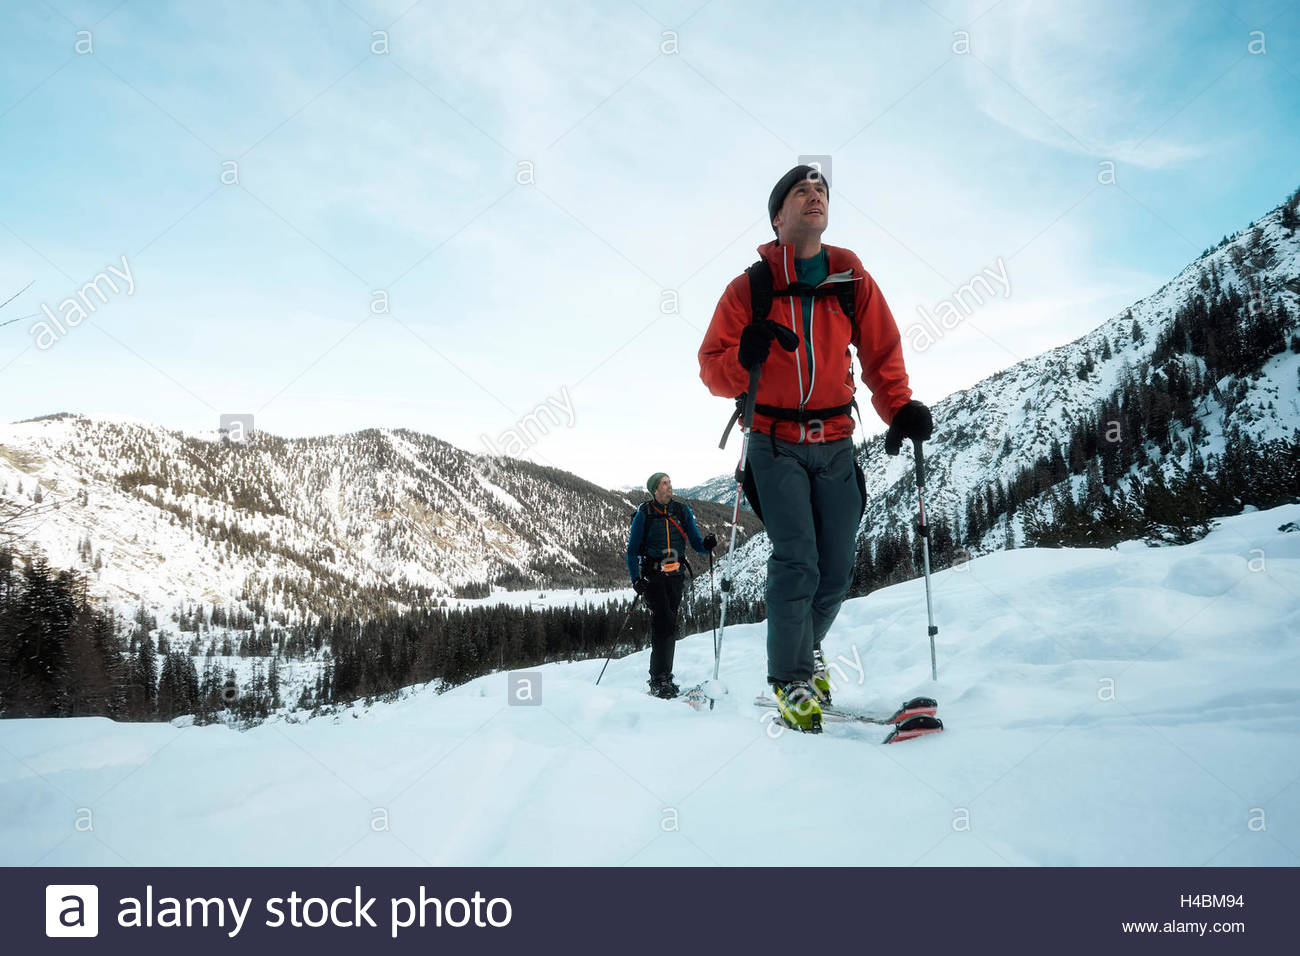 Simon Deichmann High Resolution Stock Photography and Images - Alamy